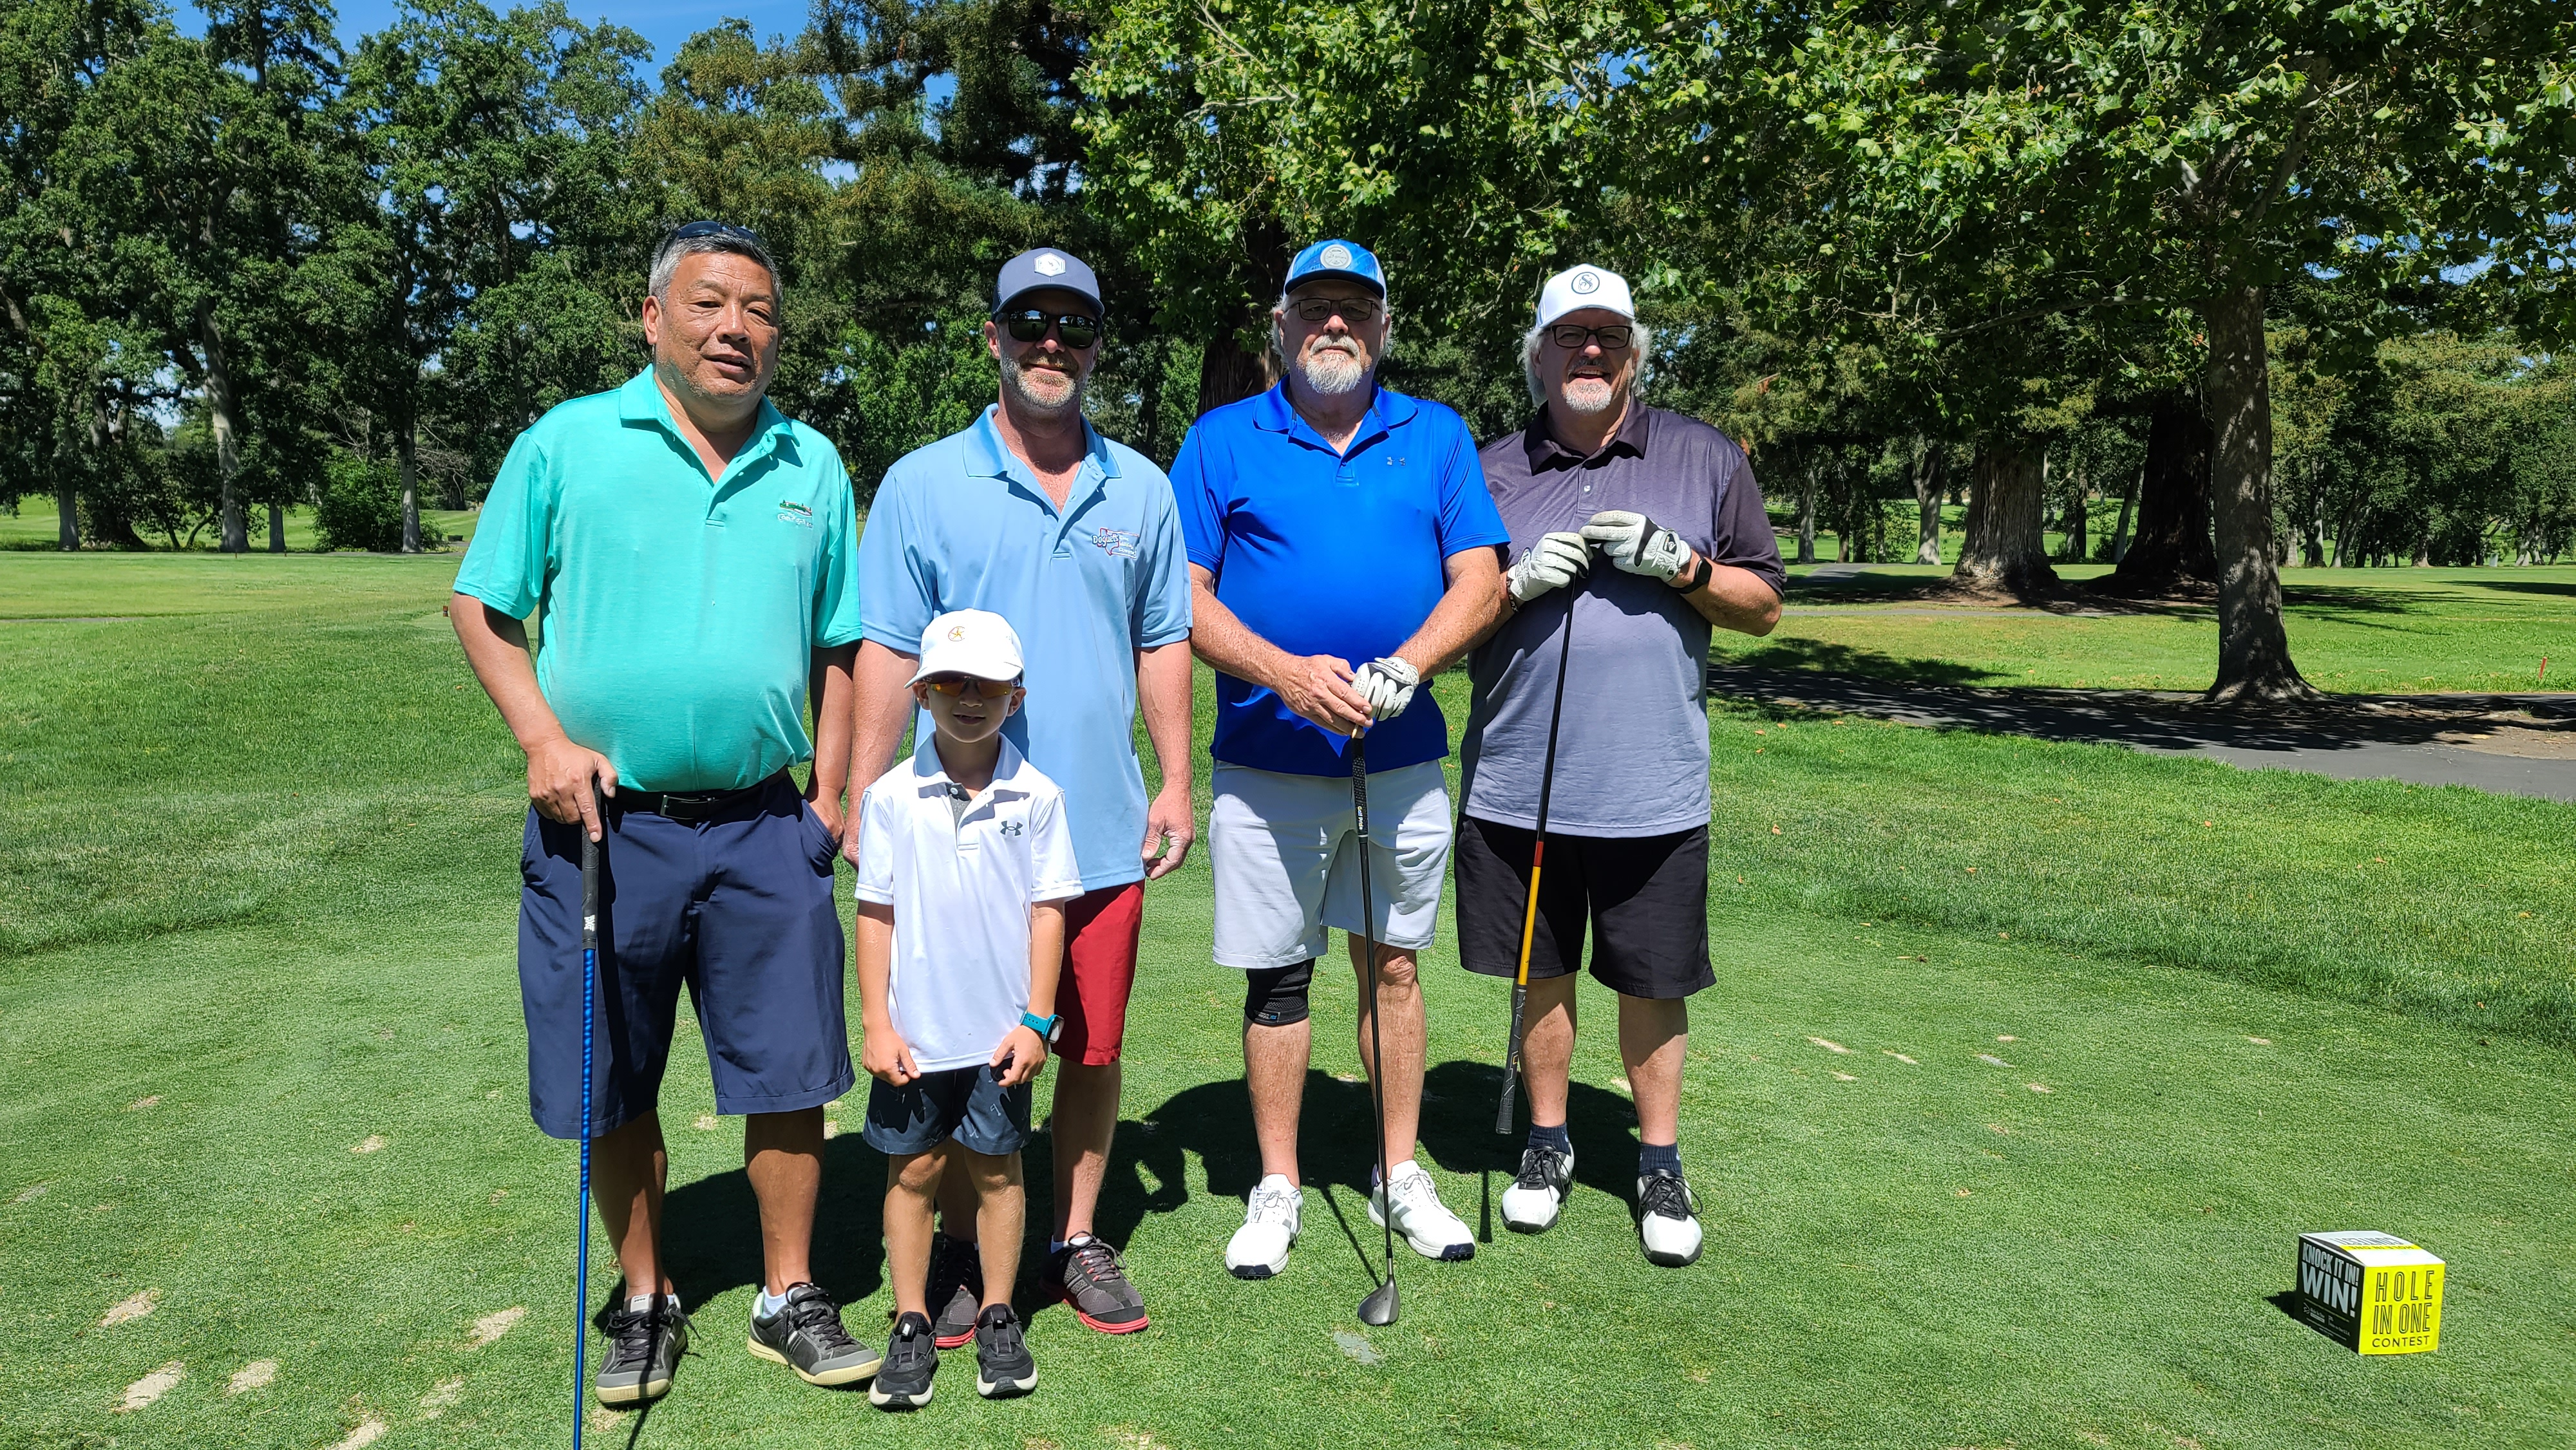 Four men holding golf clubs at a golf course.